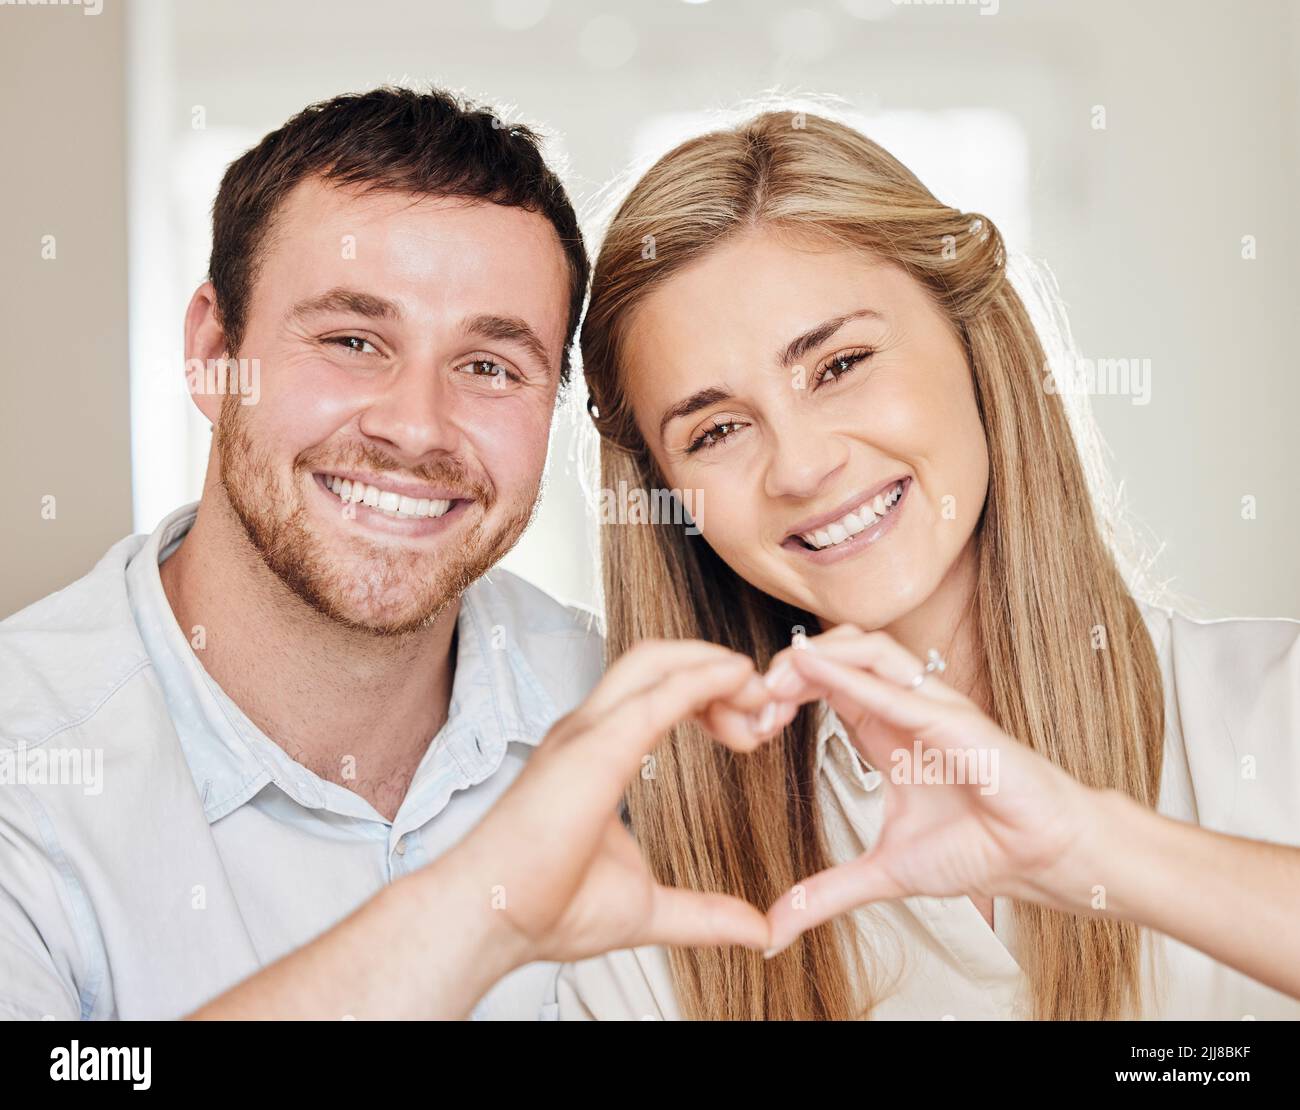 They are Gods gift to you. a young couple making a heart sign with their hands at home. Stock Photo